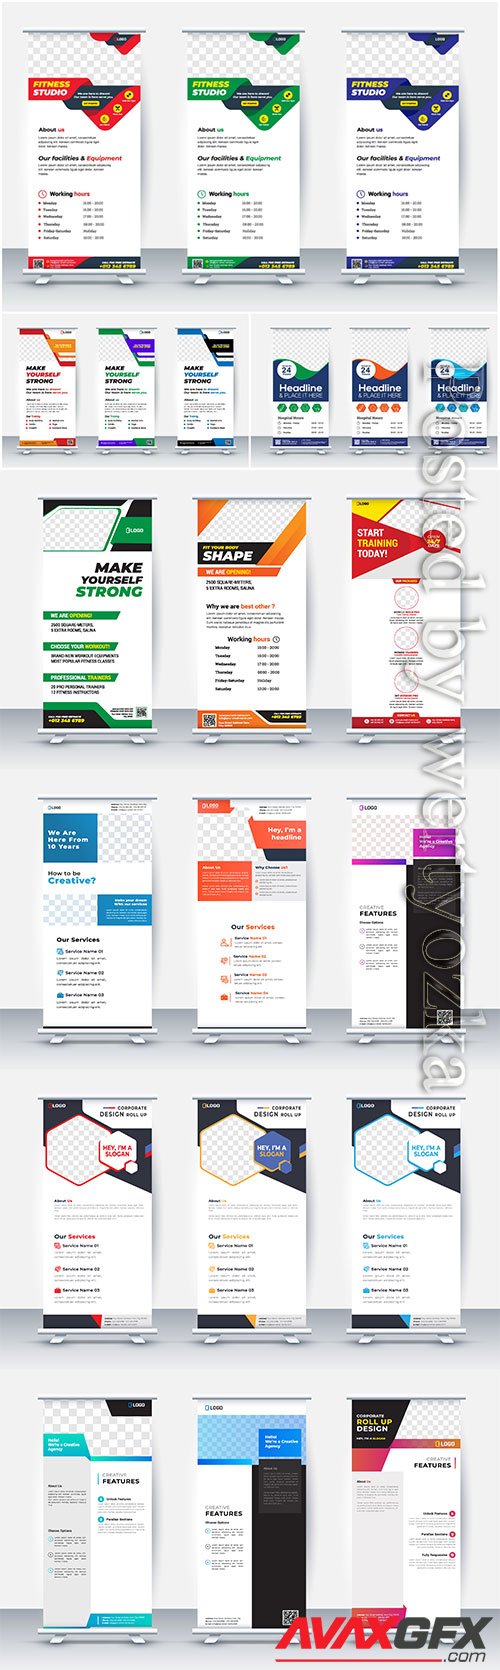 Business roll up banner stand poster, brochure flat design template creative concept